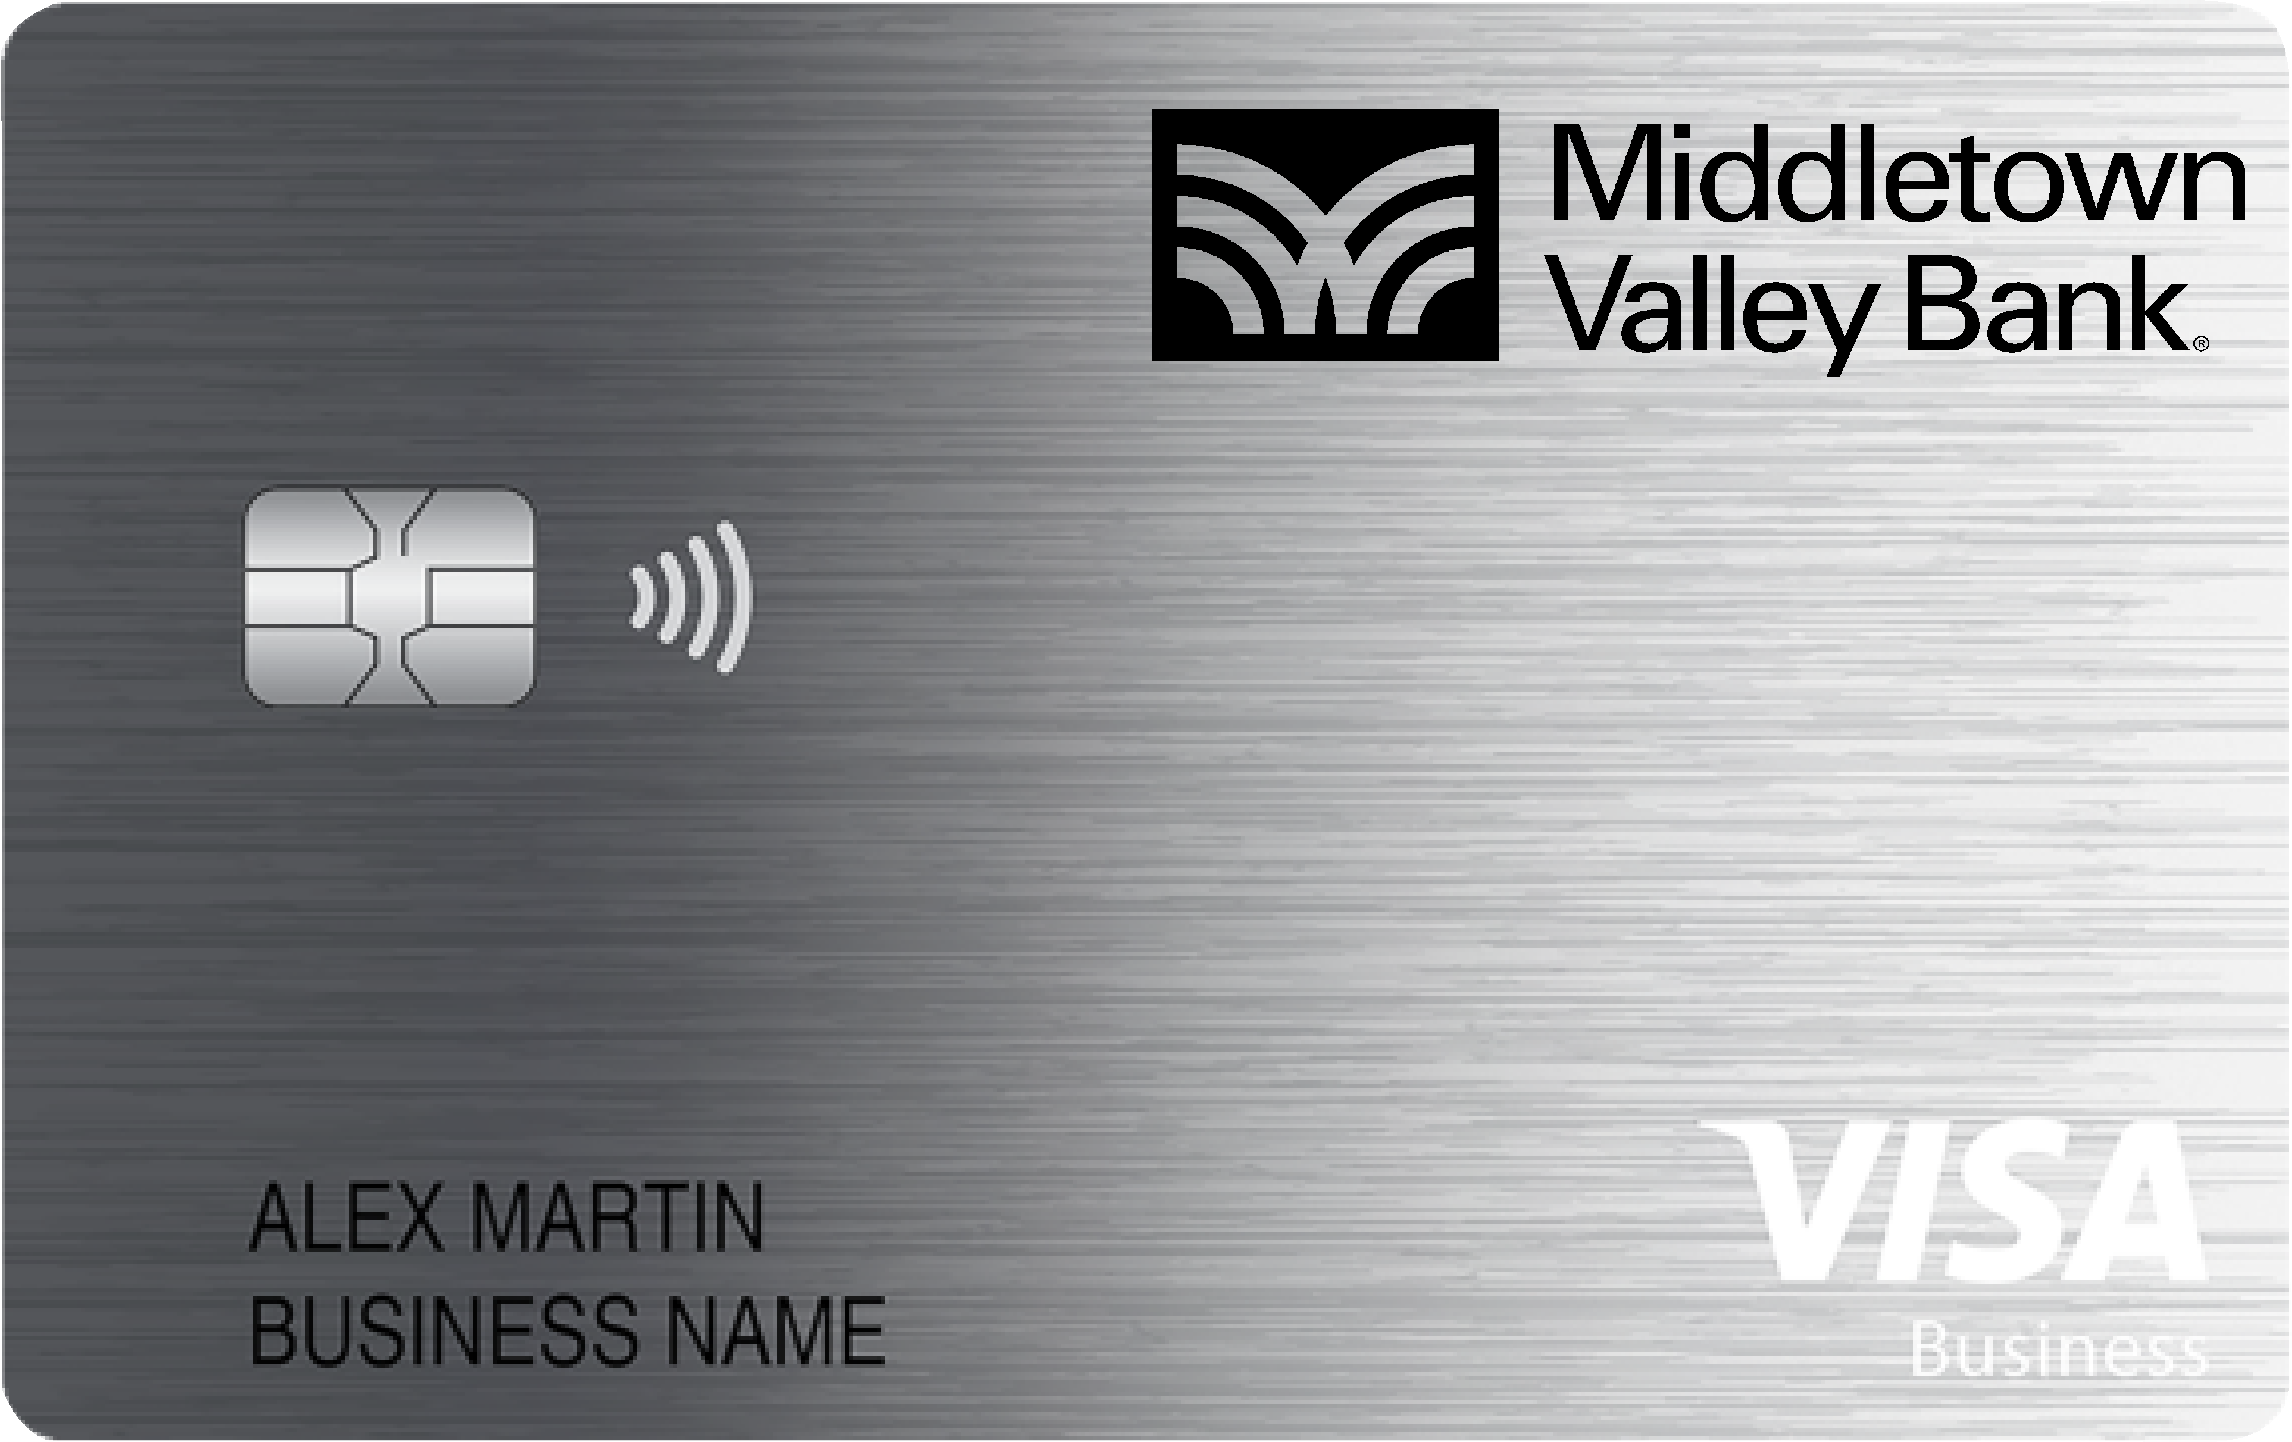 Middletown Valley Bank Business Cash Preferred Card